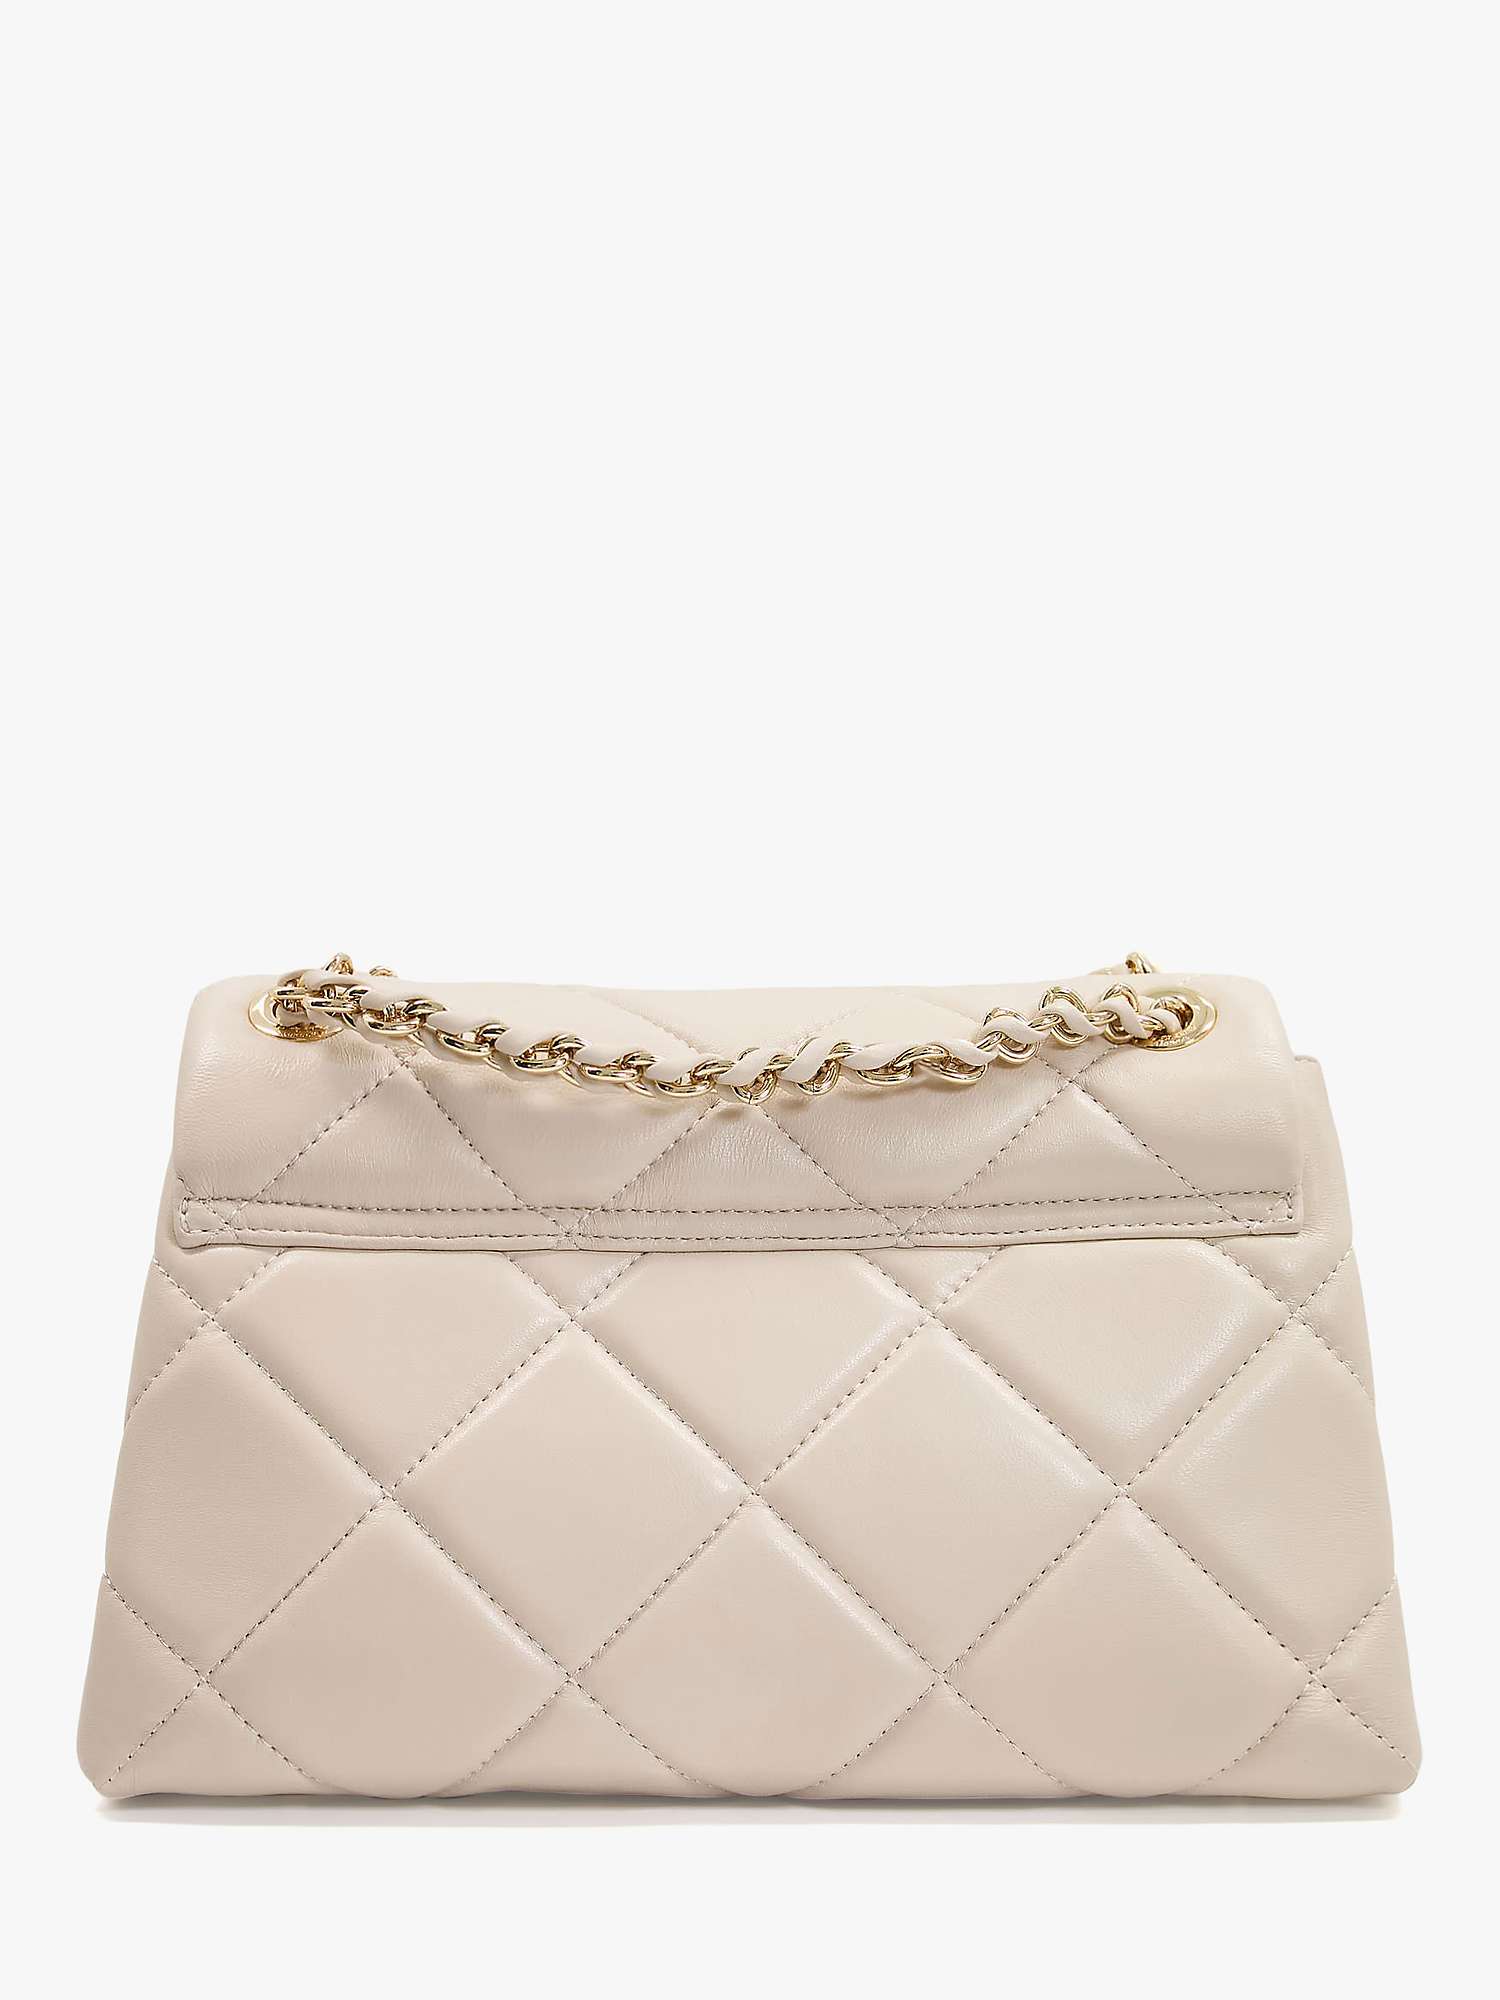 Seaside Fifty how Dune Duchess Large Quilted Leather Shoulder Bag, Cream at John Lewis &  Partners